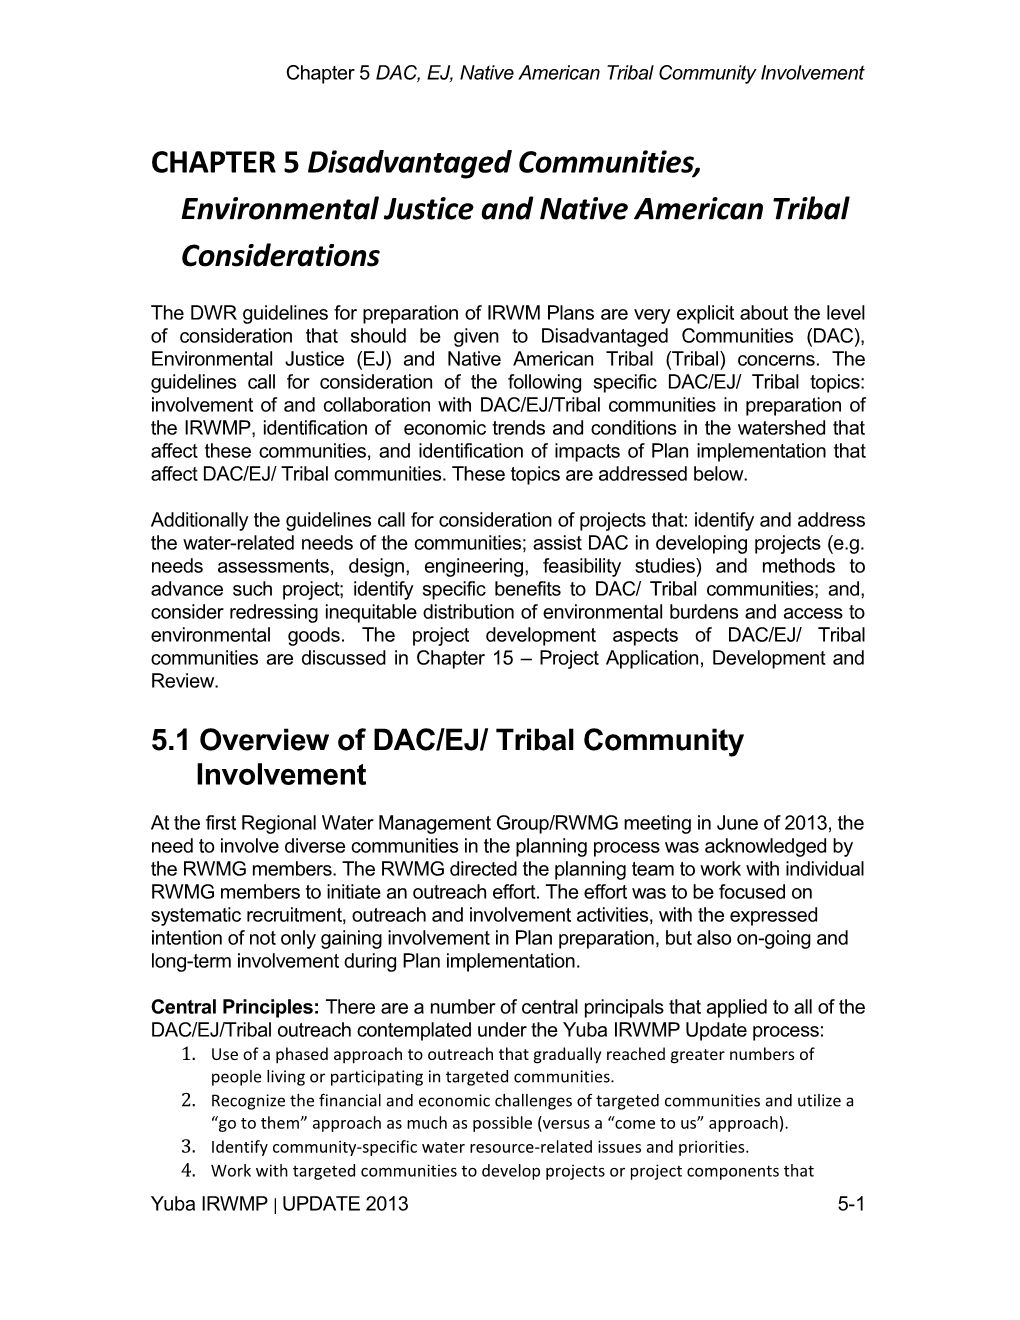 CHAPTER 5 Disadvantaged Communities, Environmental Justice and Native American Tribal